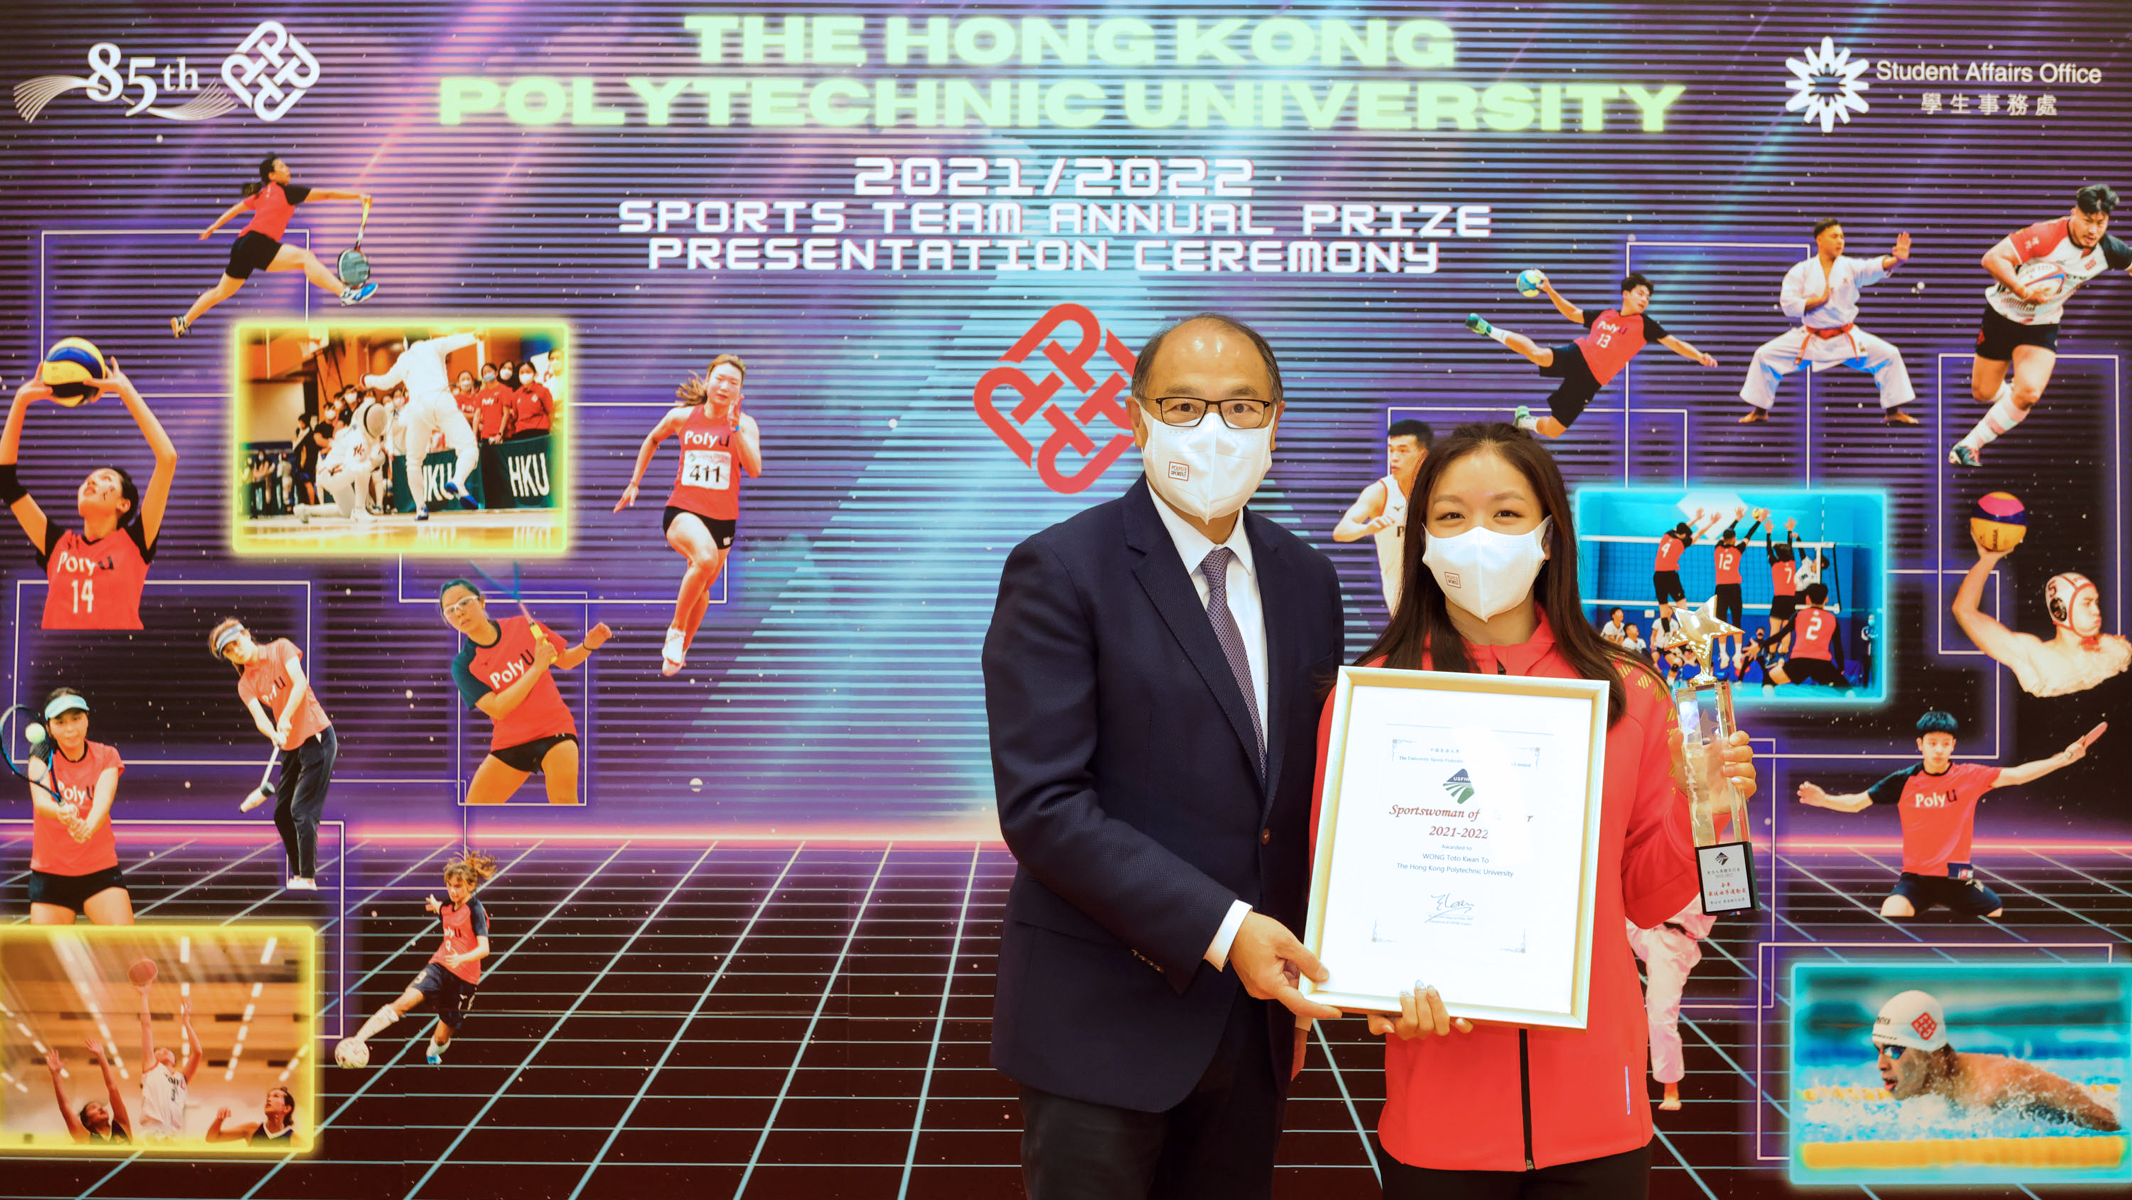 Toto Wong Kwan-to, a PolyU Optometry student and a member of the Hong Kong swimming team, was crowned ‘Sportswoman of the Year’ and won an Individual Champion award in the 2021/22 Inter-Collegiate Competition.